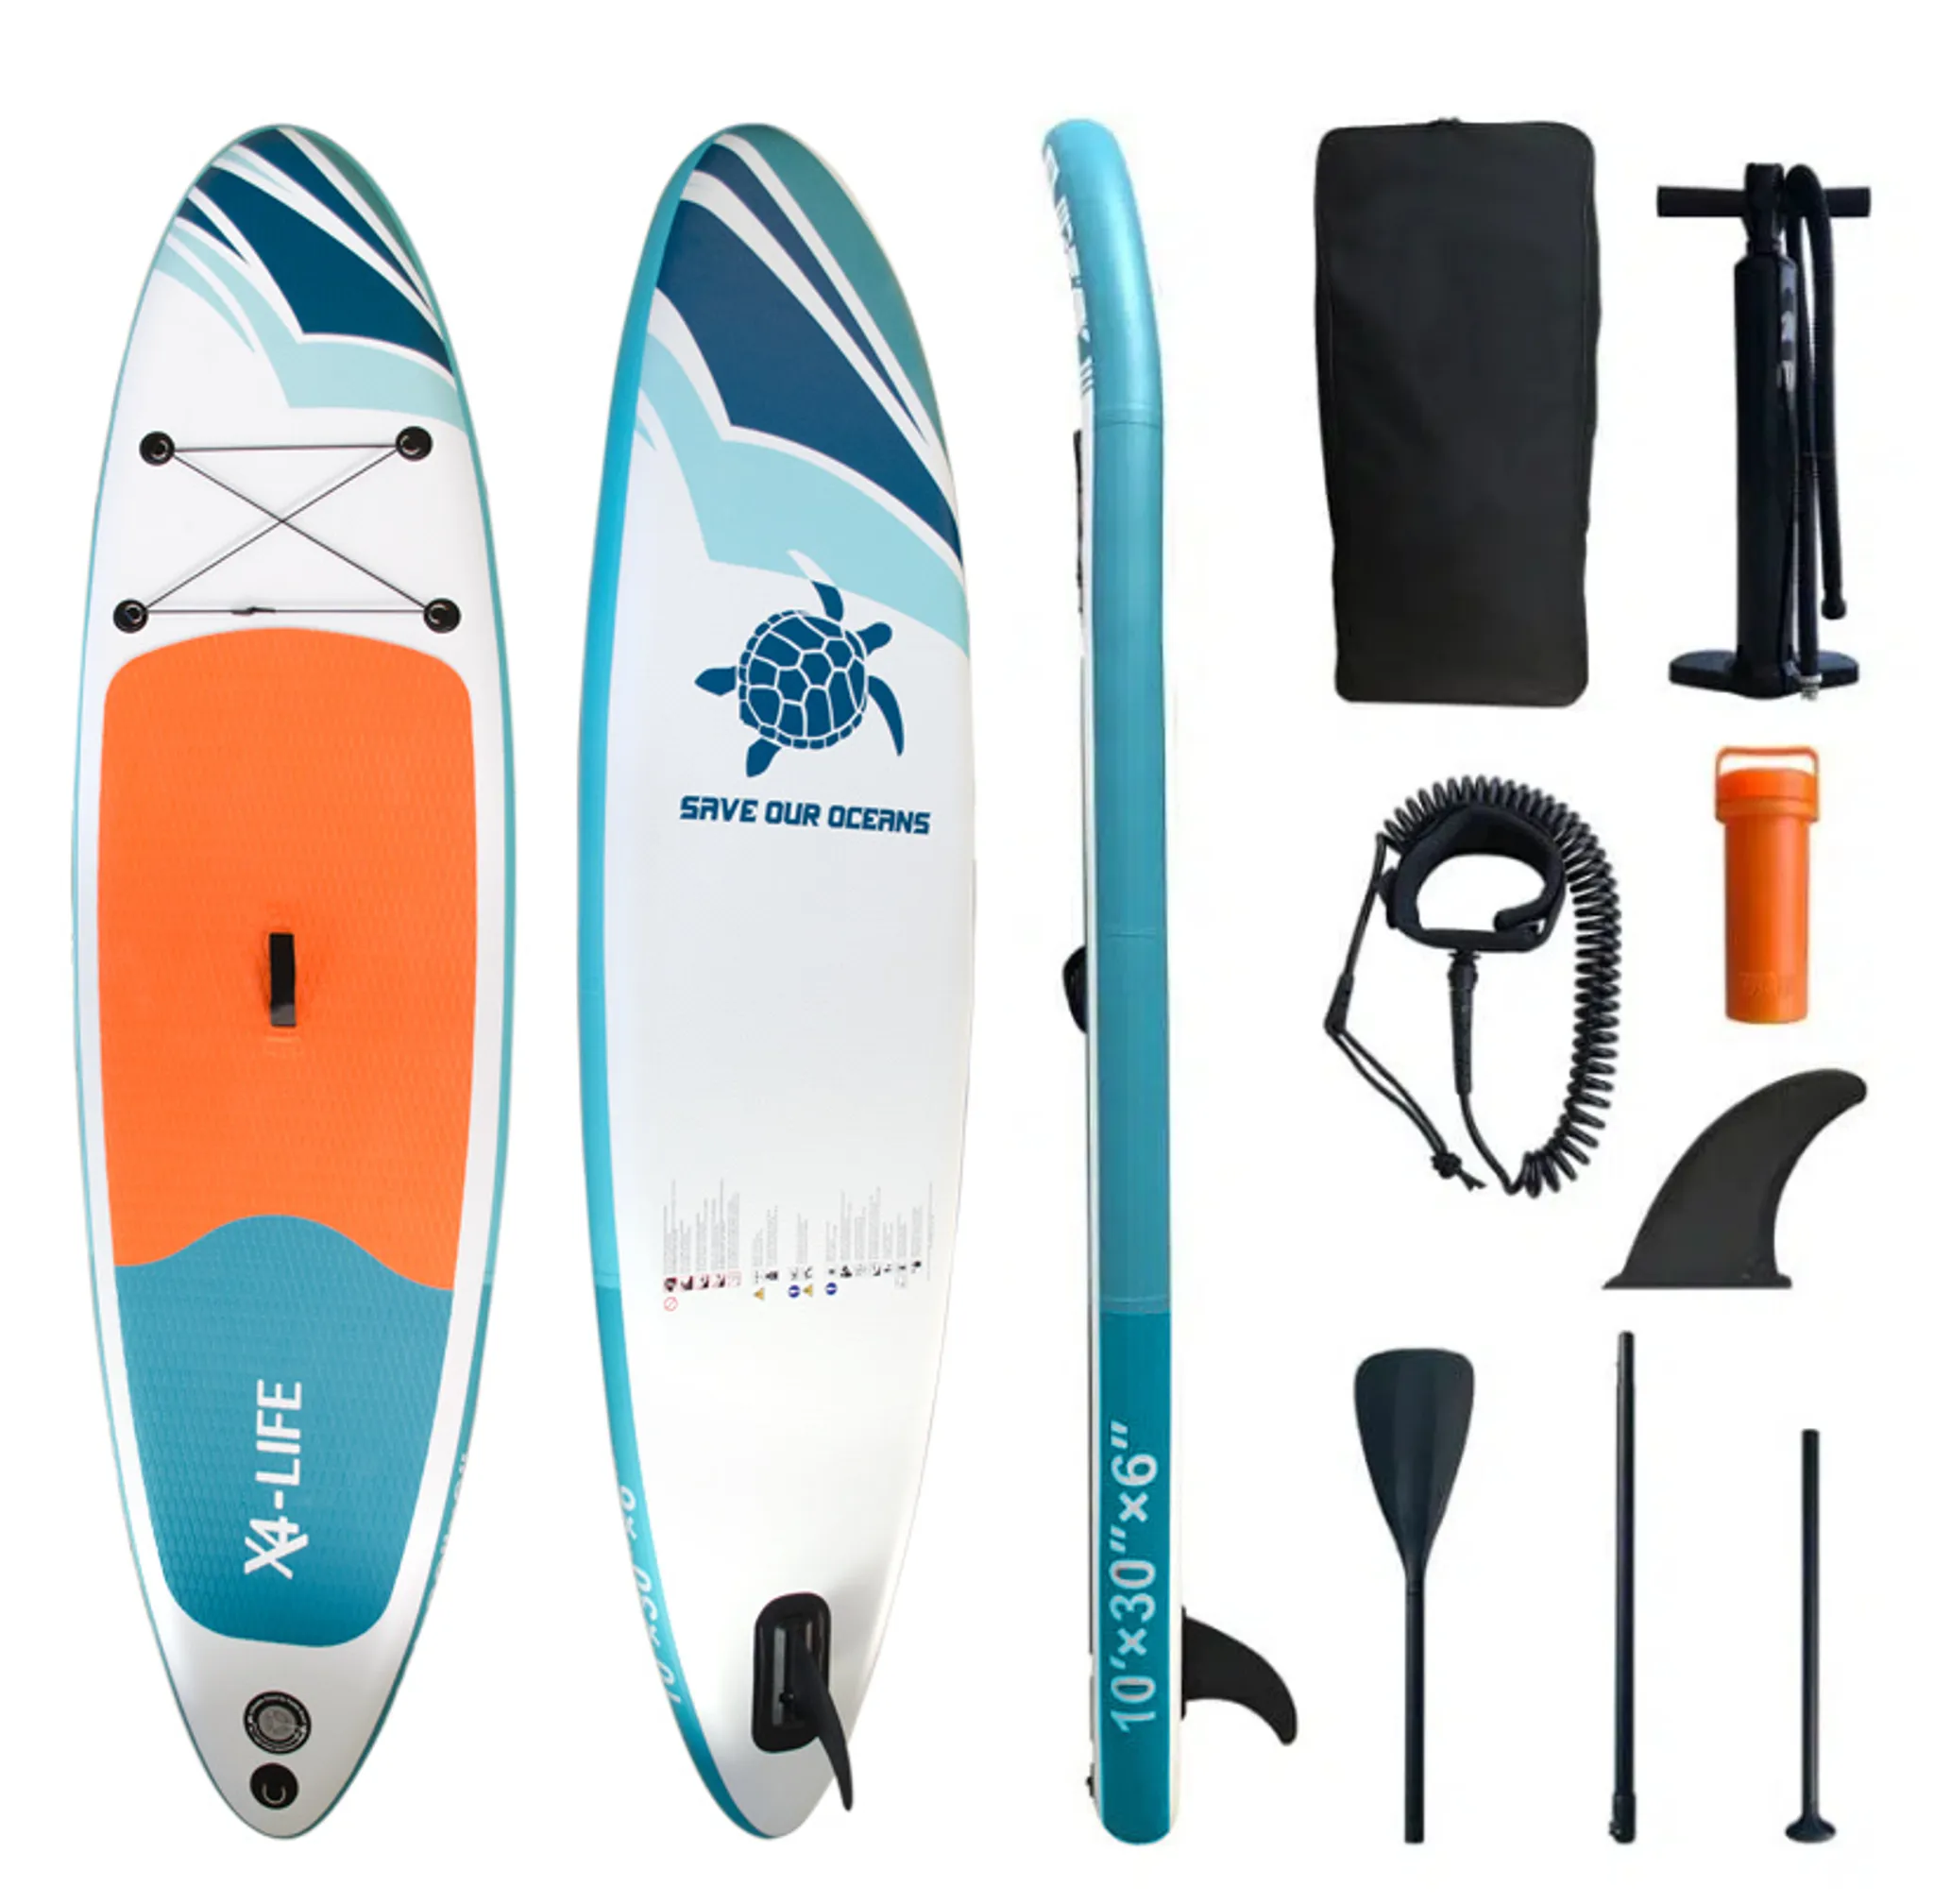 X4-LIFE Stand Paddle - Board SUP Up Set